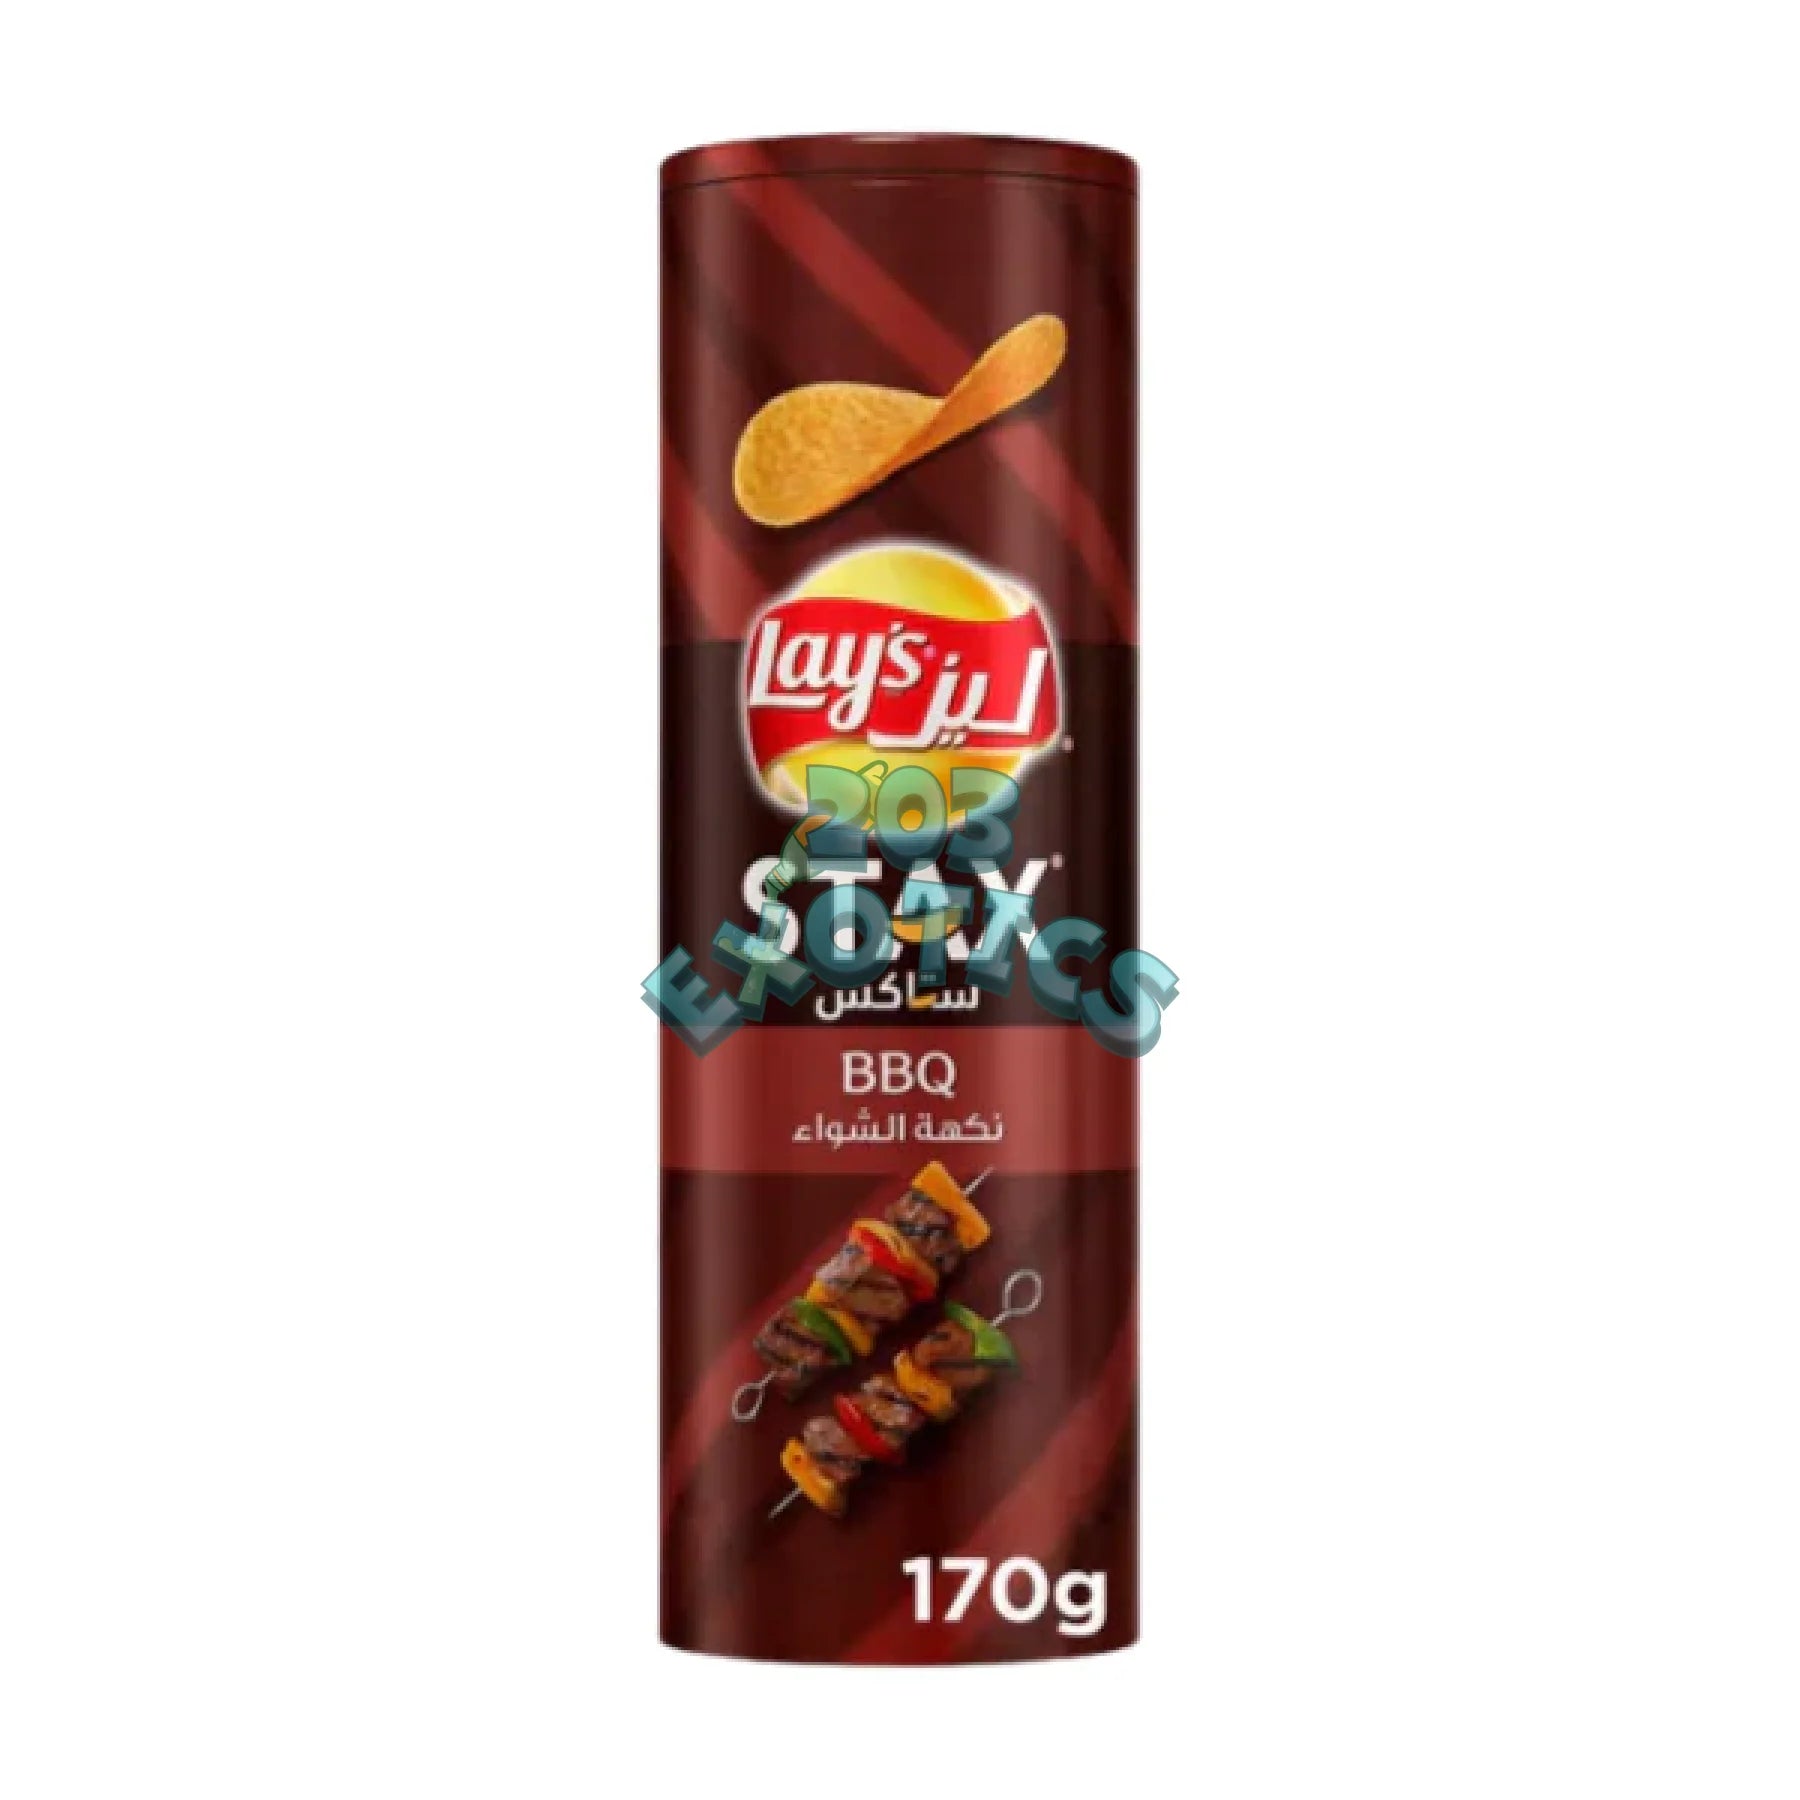 Lay’s Staxx Bbq (170G) New From Dubai!! Chips